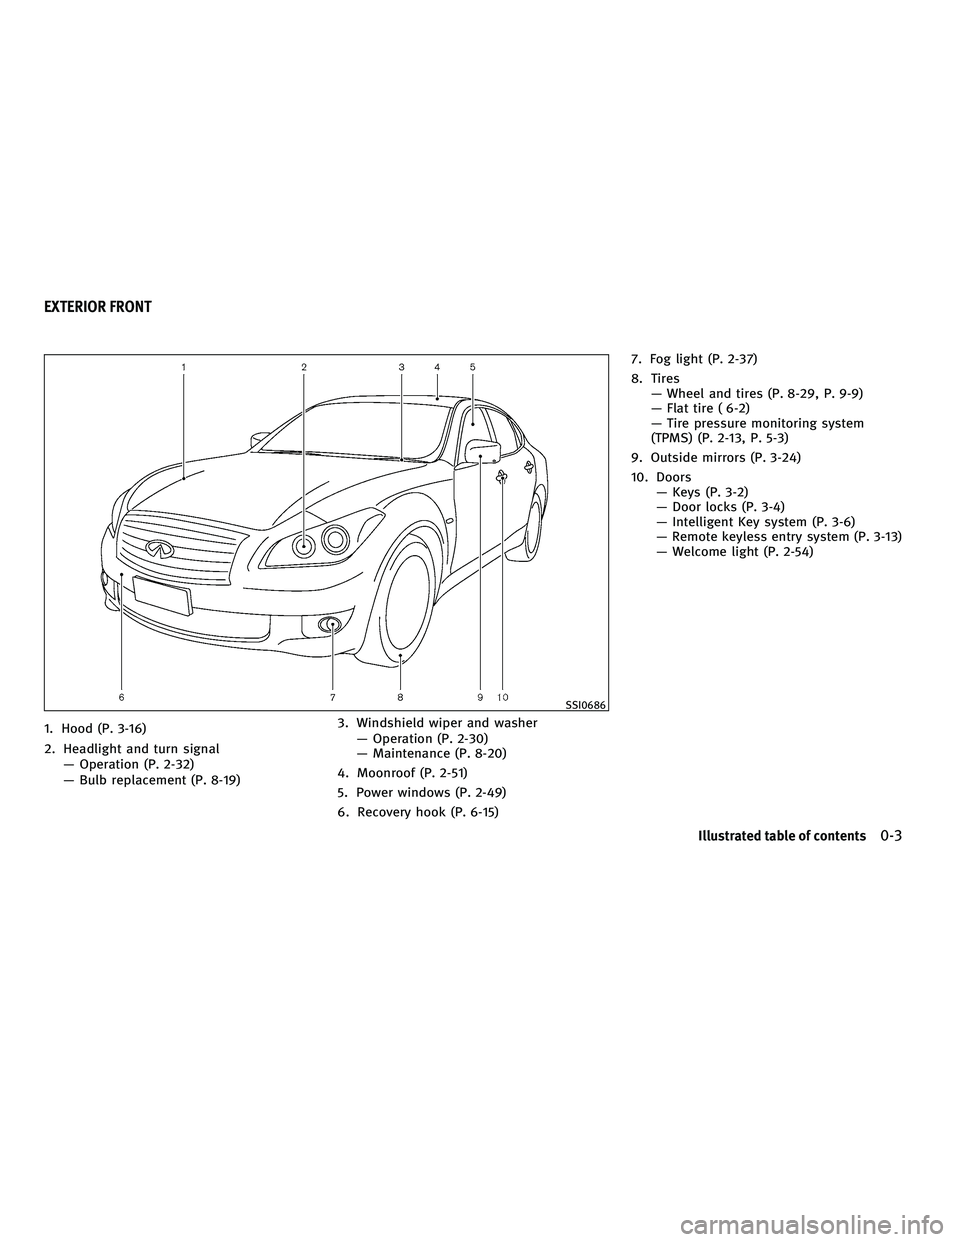 INFINITI M 2011  Owners Manual 1. Hood (P. 3-16)
2. Headlight and turn signal— Operation (P. 2-32)
— Bulb replacement (P. 8-19) 3. Windshield wiper and washer
— Operation (P. 2-30)
— Maintenance (P. 8-20)
4. Moonroof (P. 2-